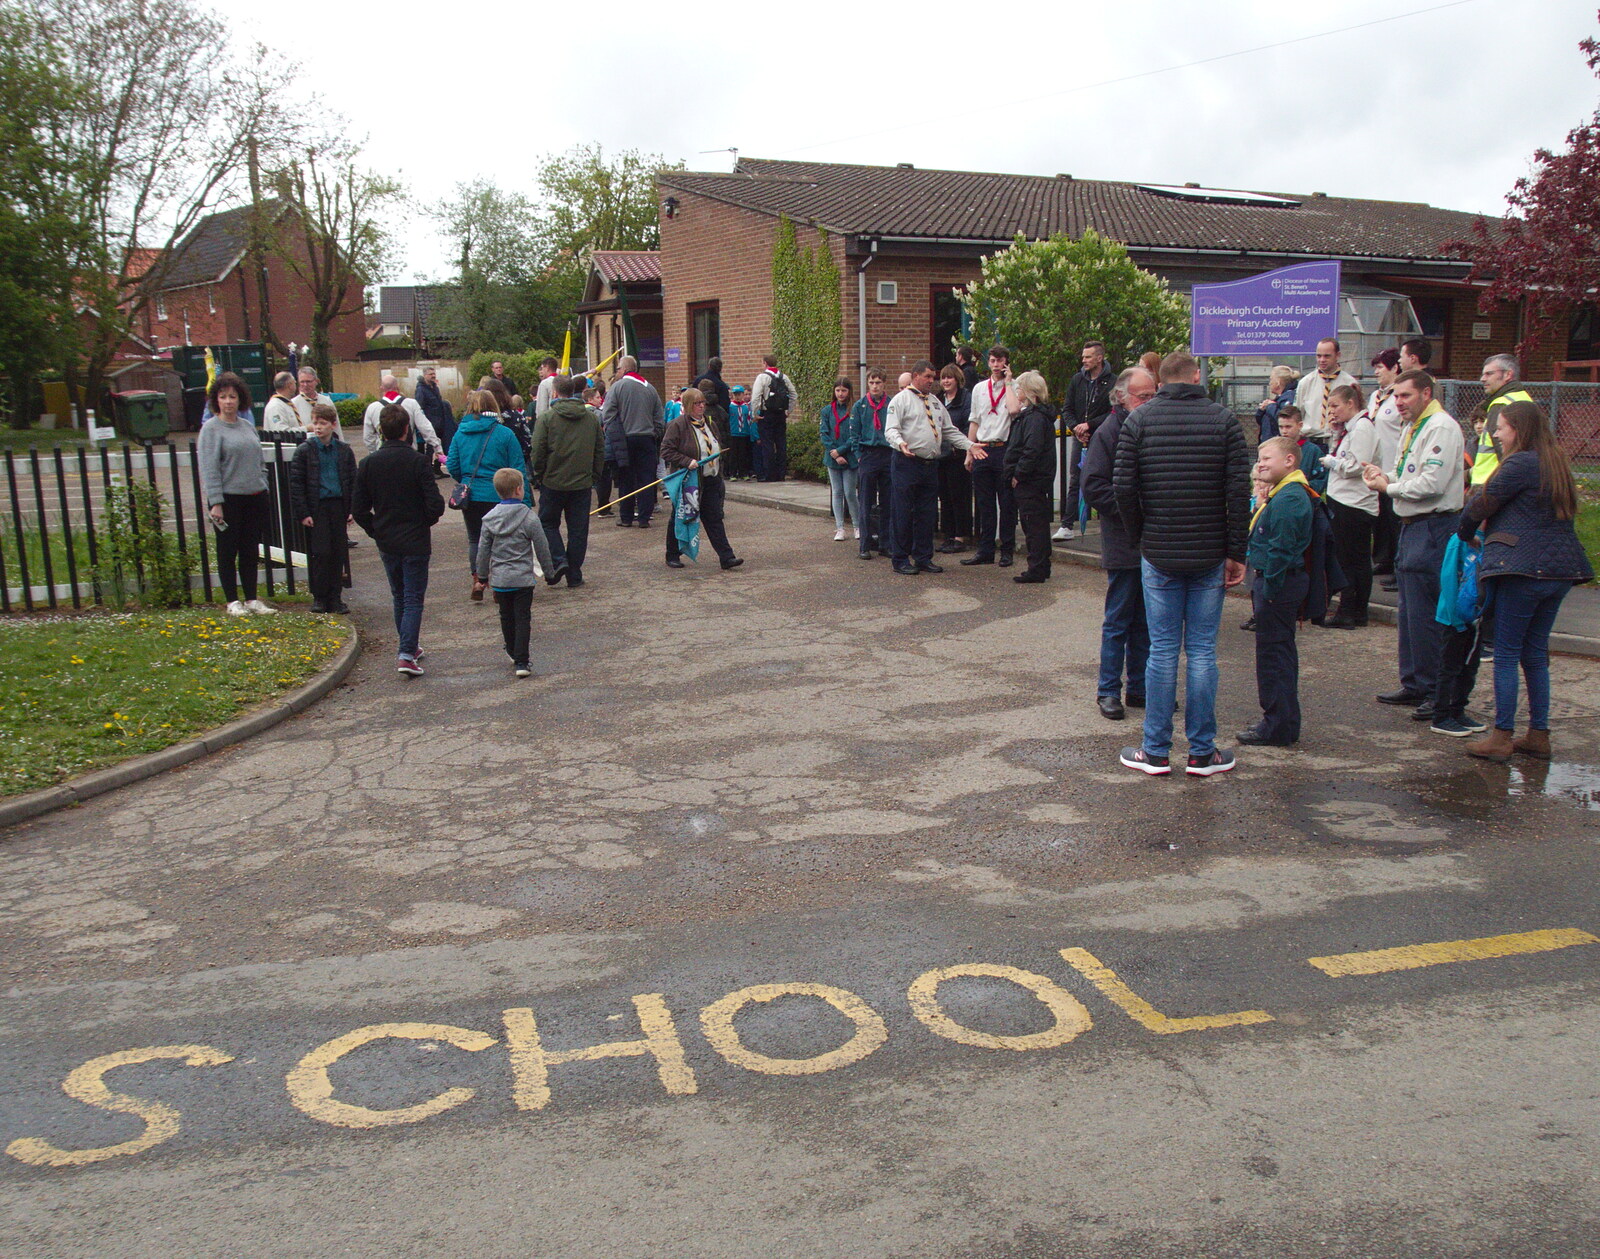 People assemble at the school from A St. George's Day Parade, Dickleburgh, Norfolk - 28th April 2019